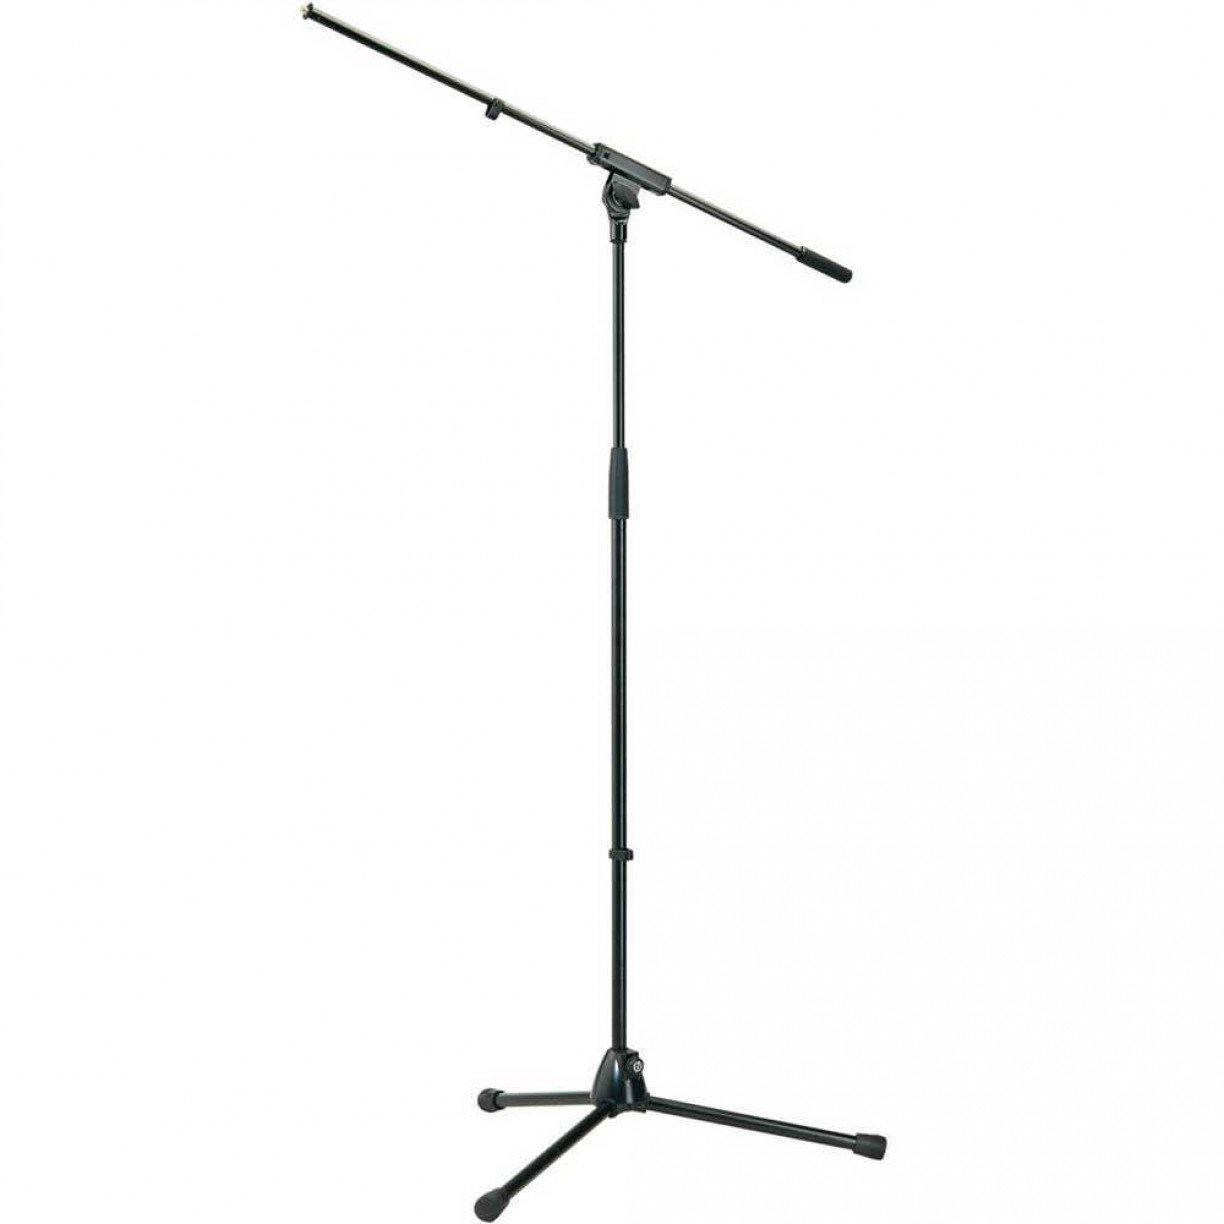 Microphone Boom Stand Plus - Accessories - Stands by Konig and Meyer at Muso's Stuff